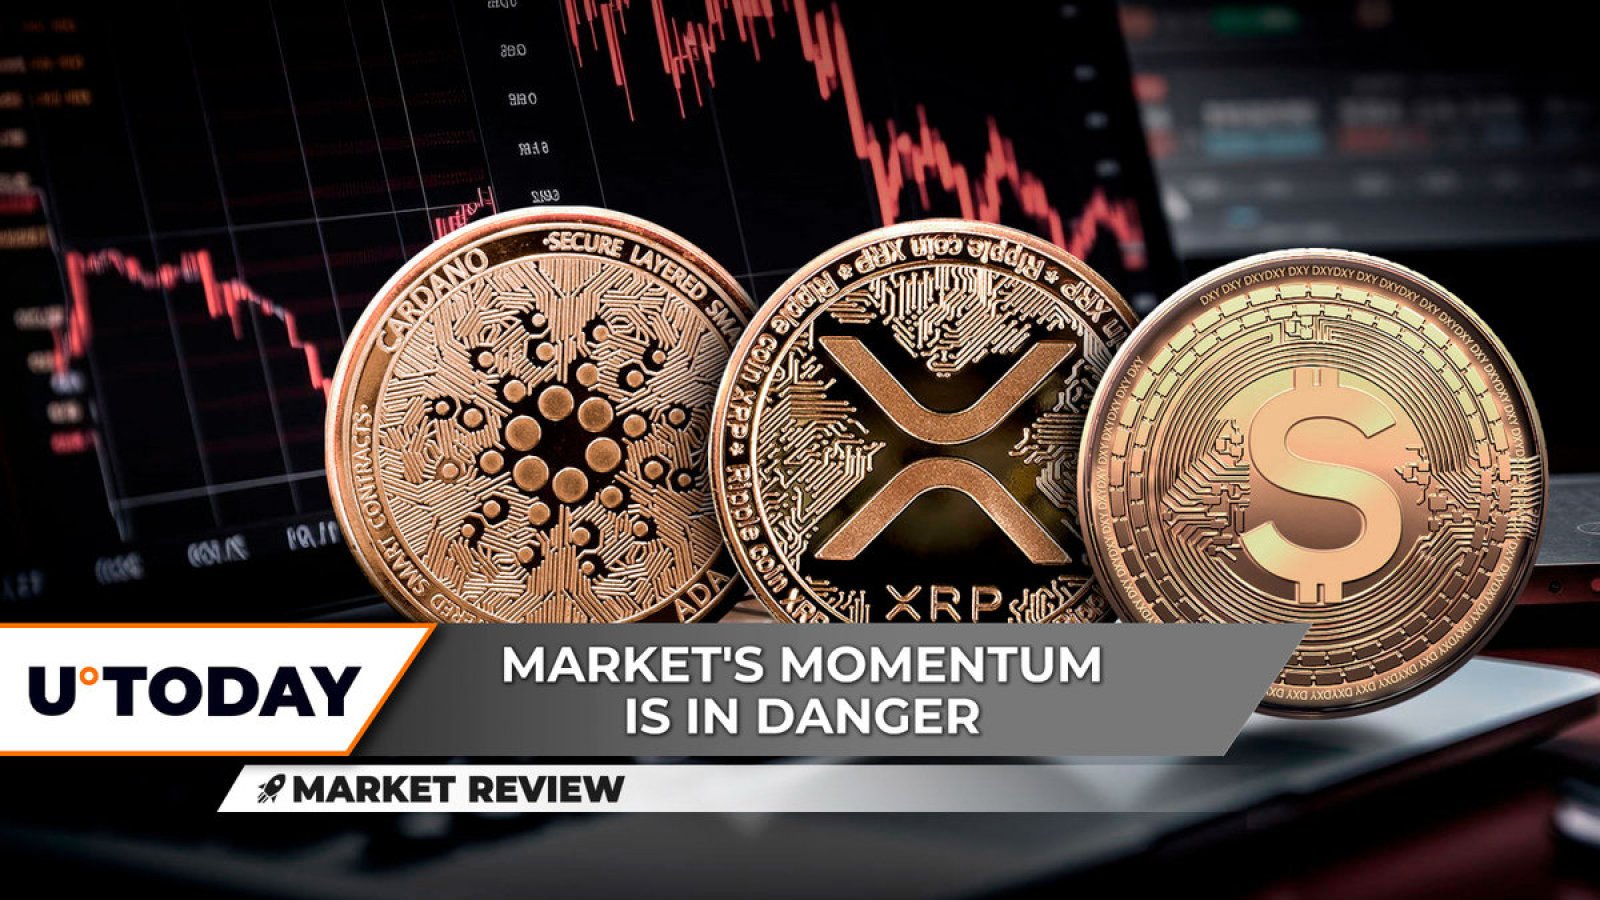 Cardano (ADA) Brutally Rejected, DXY Push to Kill Crypto Market's Momentum, Is XRP Reversal Starting?